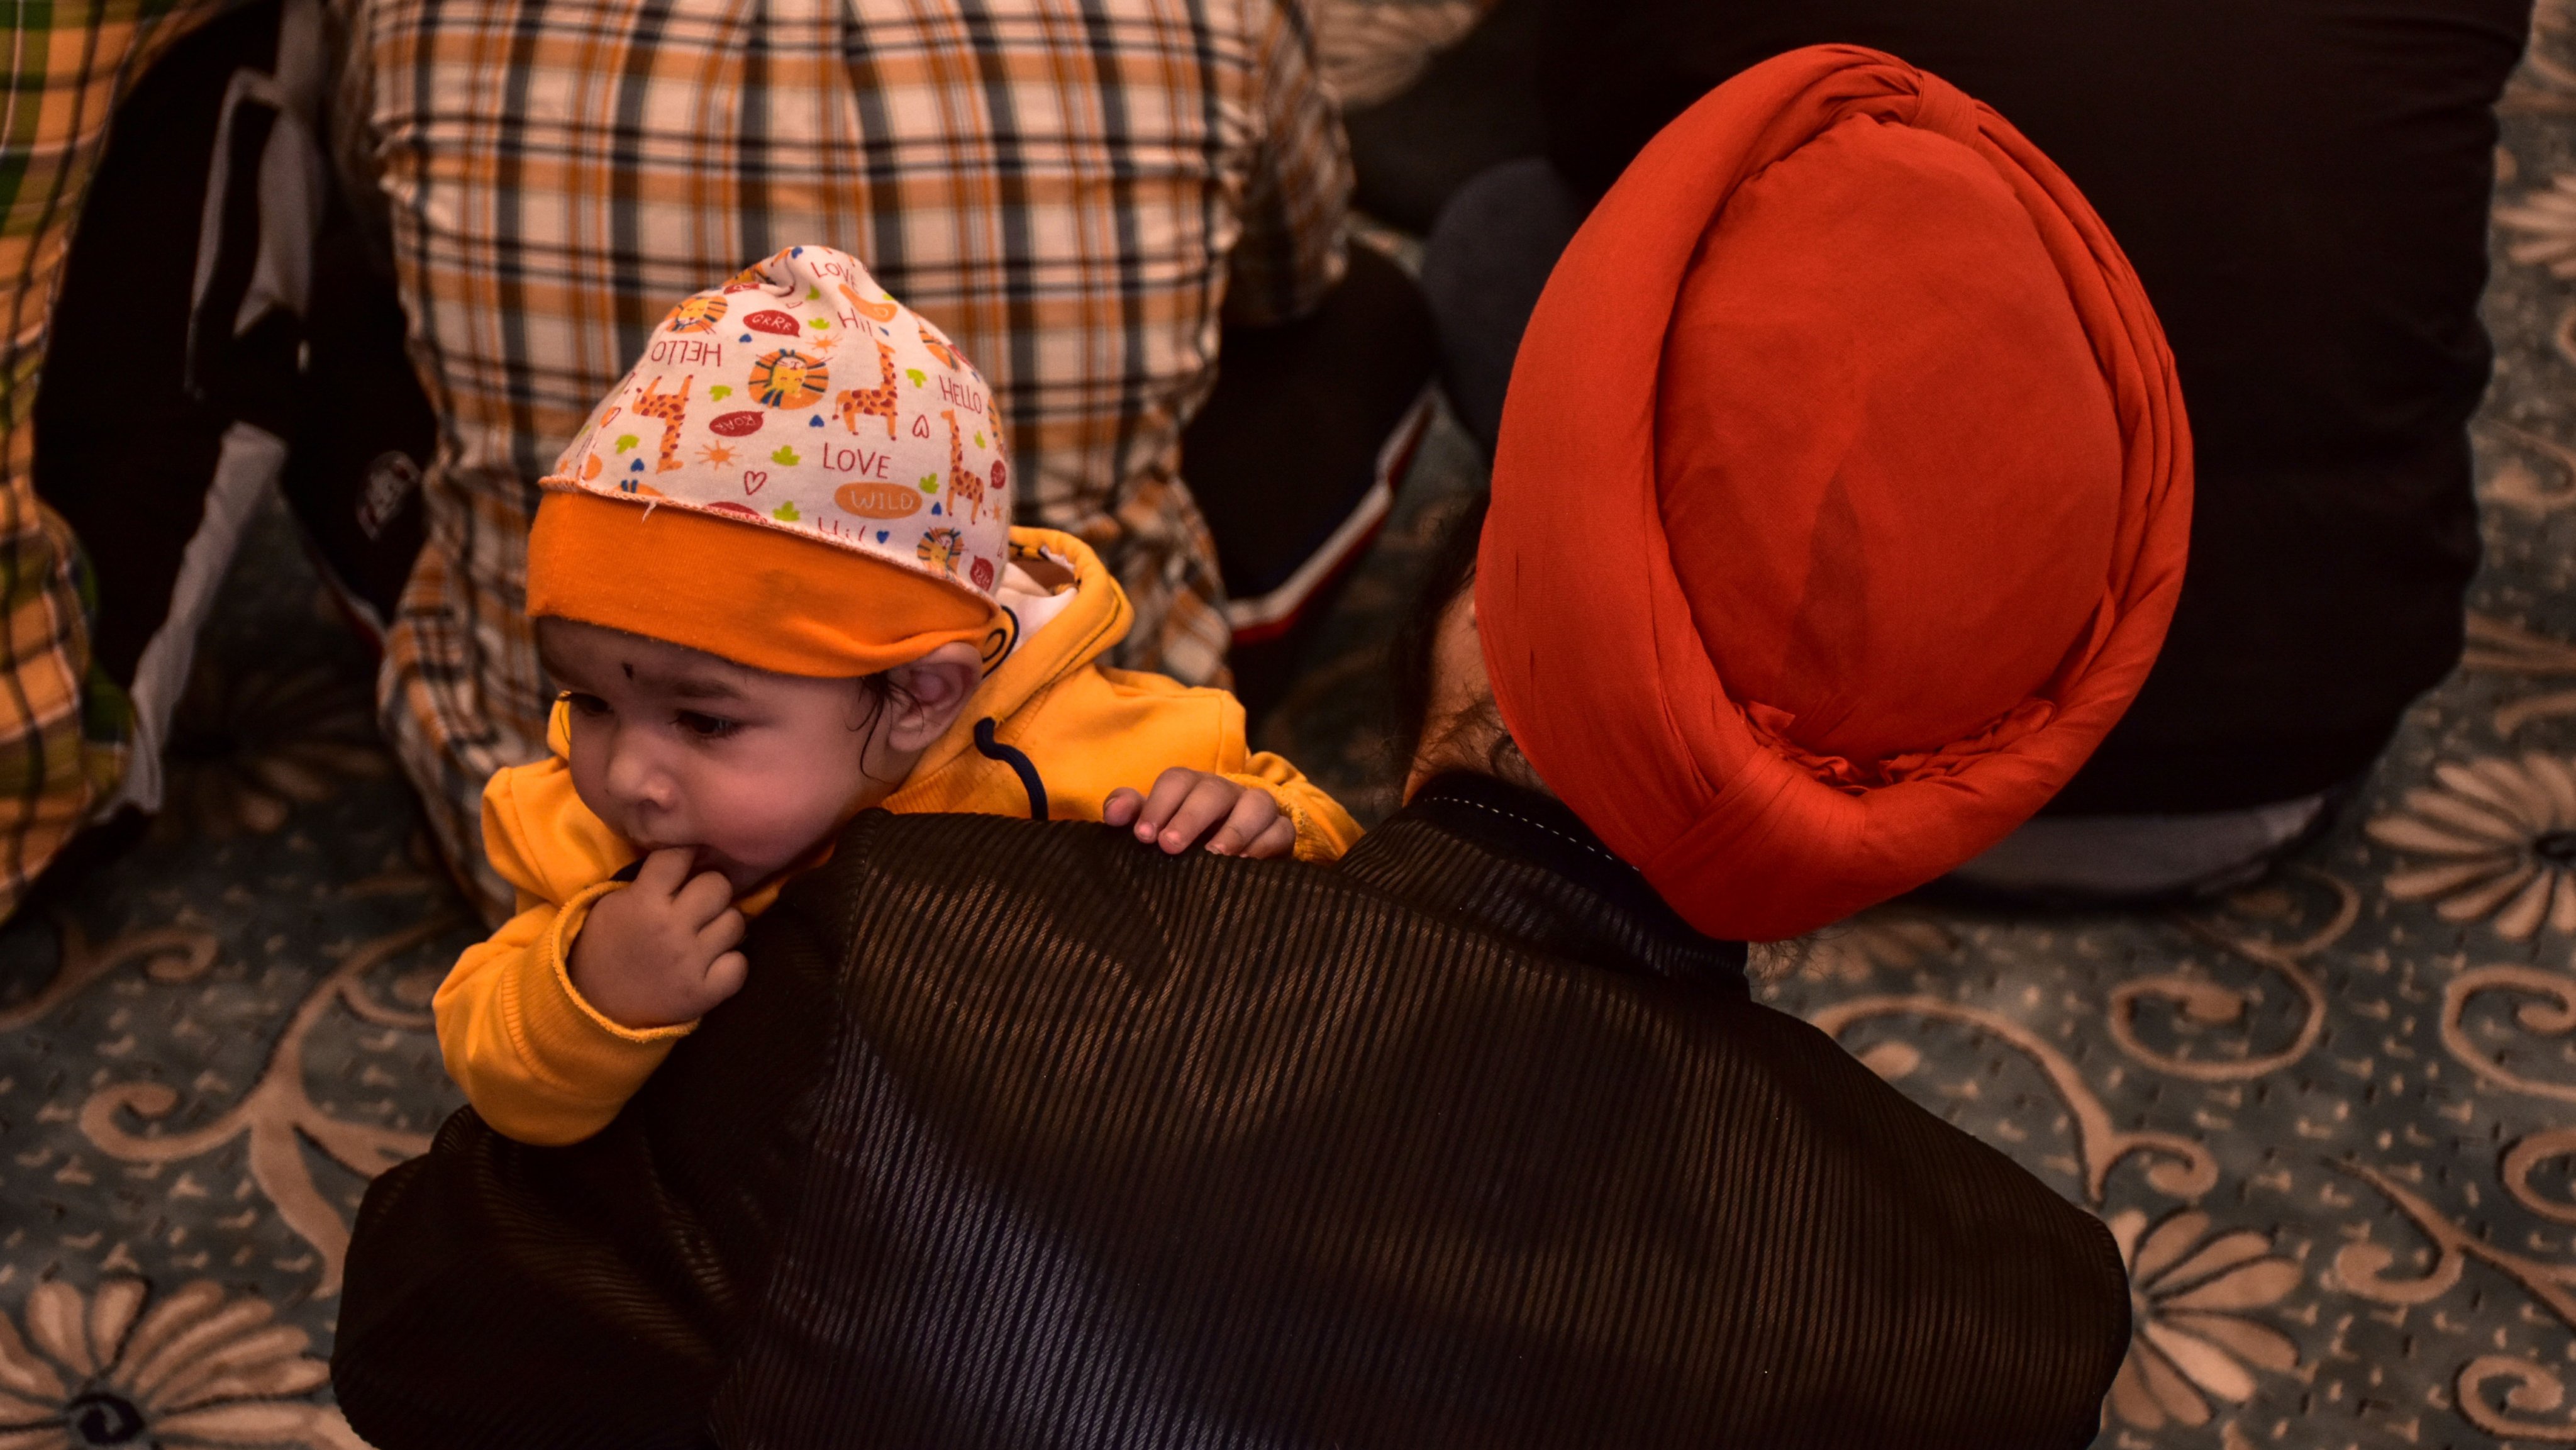 A Sikh devotee holds his baby during rituals inside a